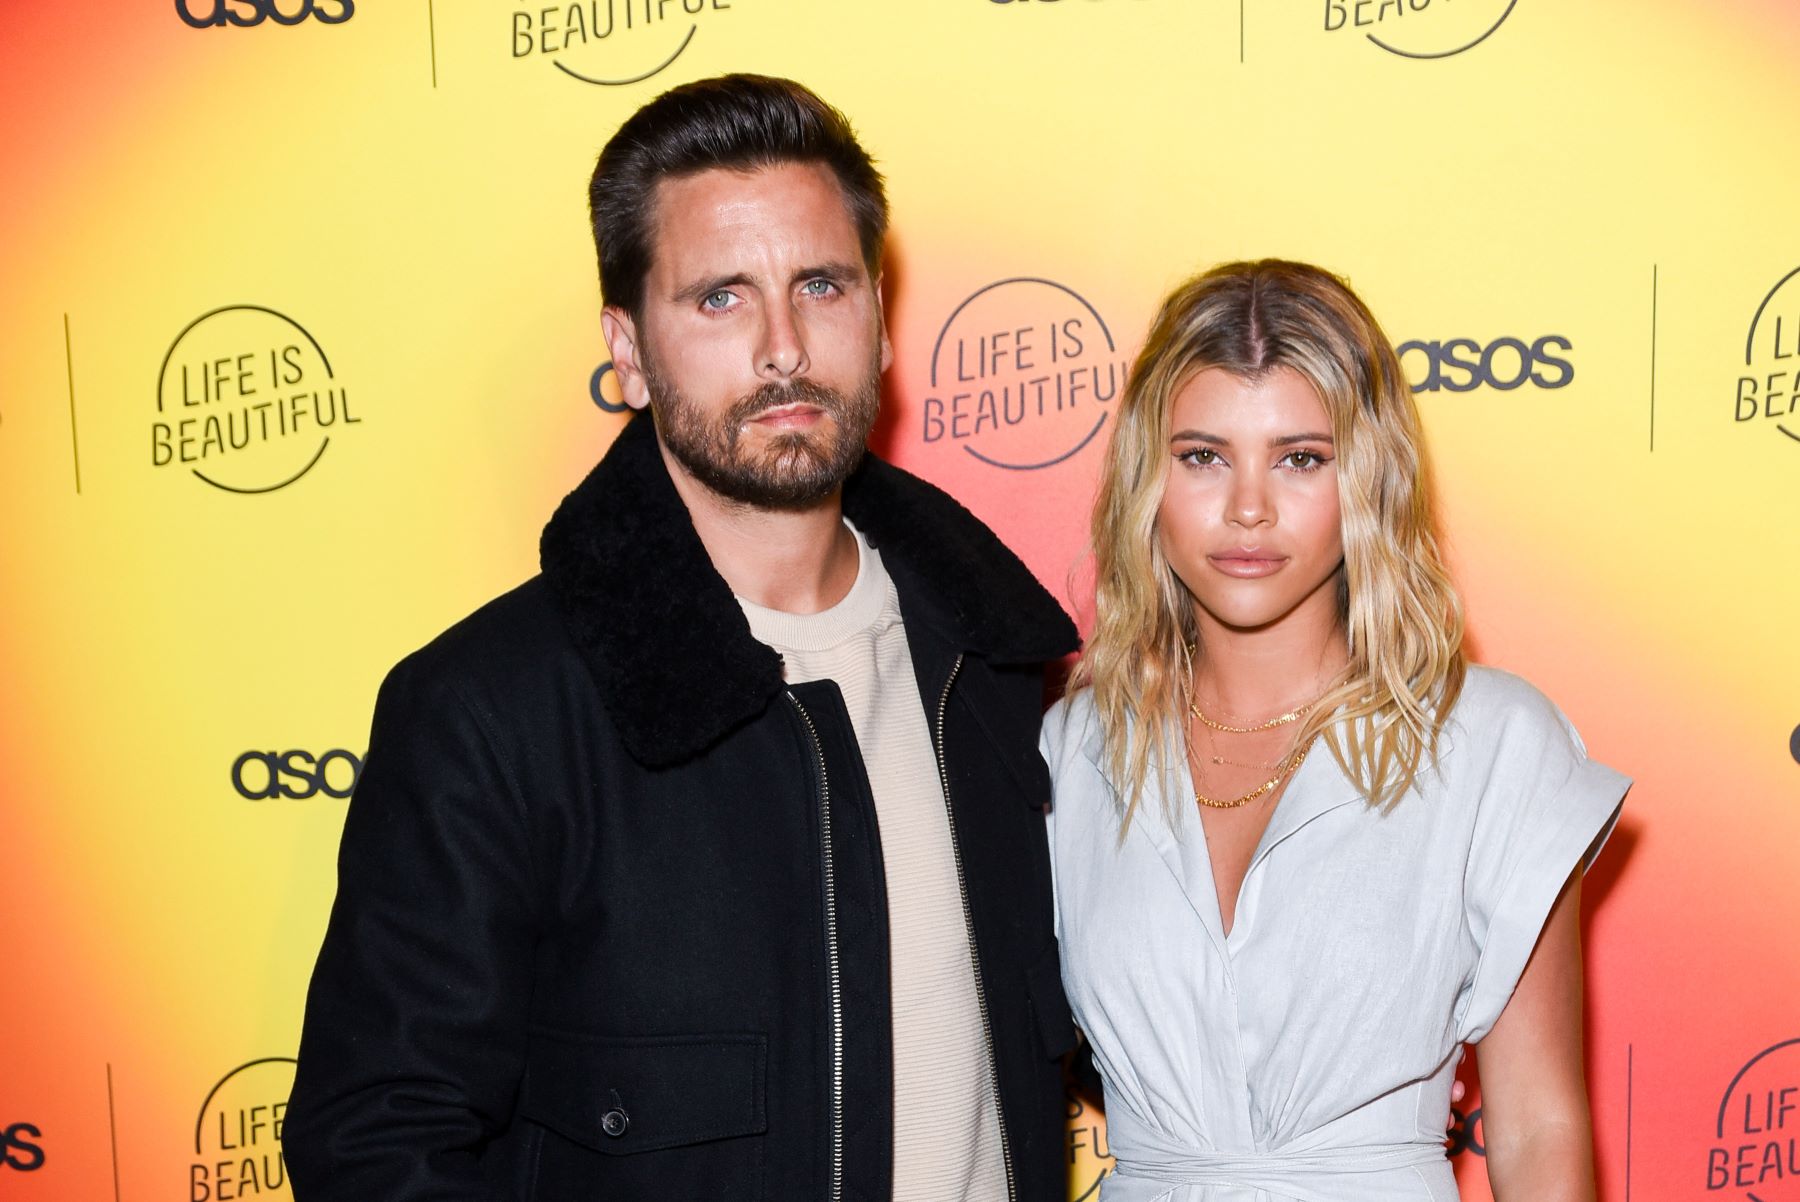 Scott Disick and Sofia Richie attending the ASOS Celebrates Partnership with Life Is Beautiful in Los Angeles, California